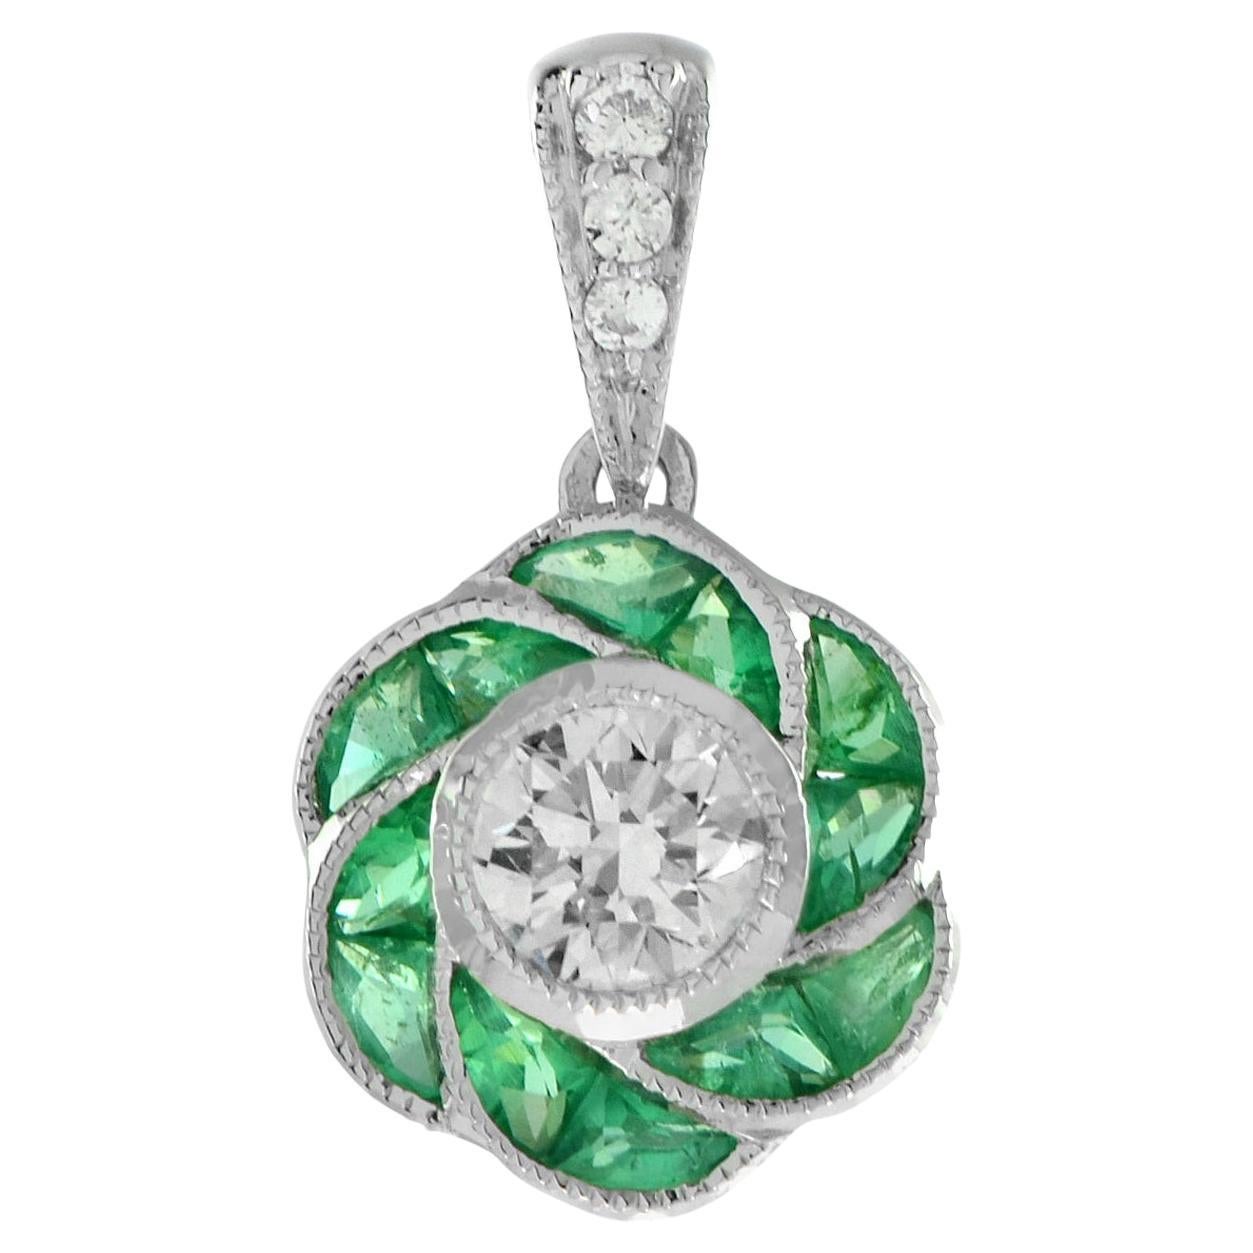 Round Cut Diamond with Emerald Art Deco Style Floral Pendant in 18K Gold